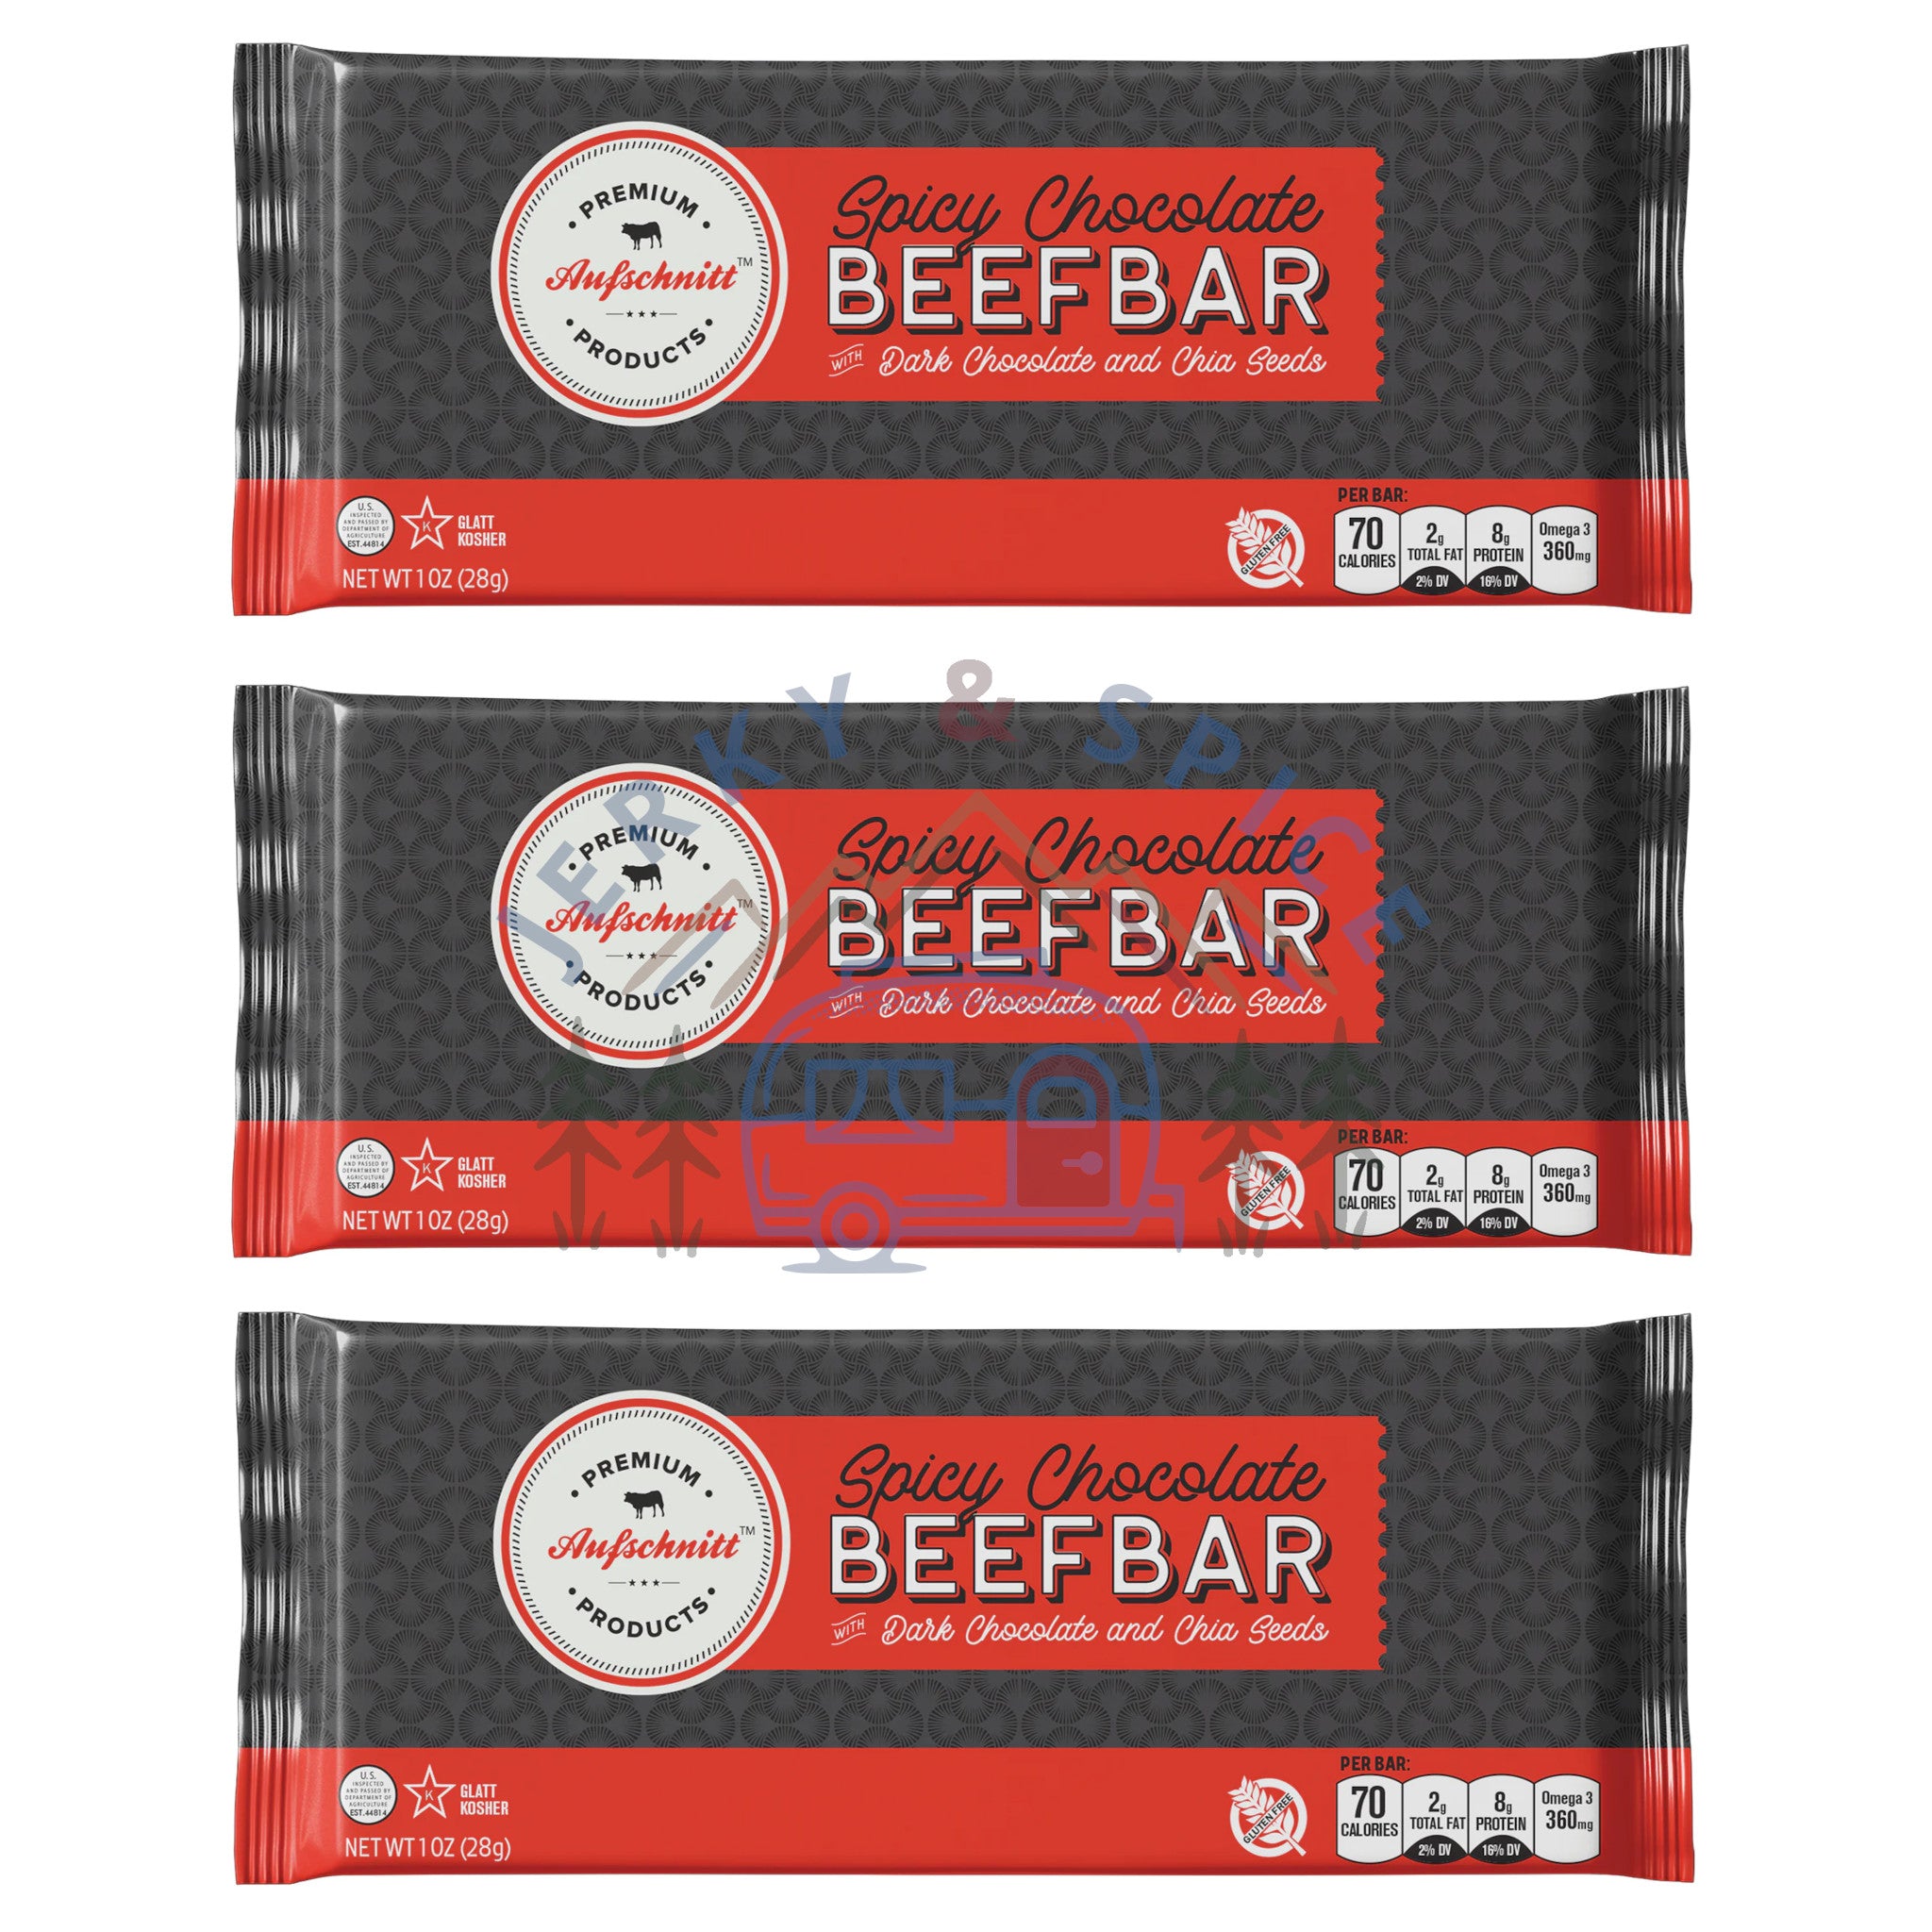 Spicy Chocolate Beef Bar